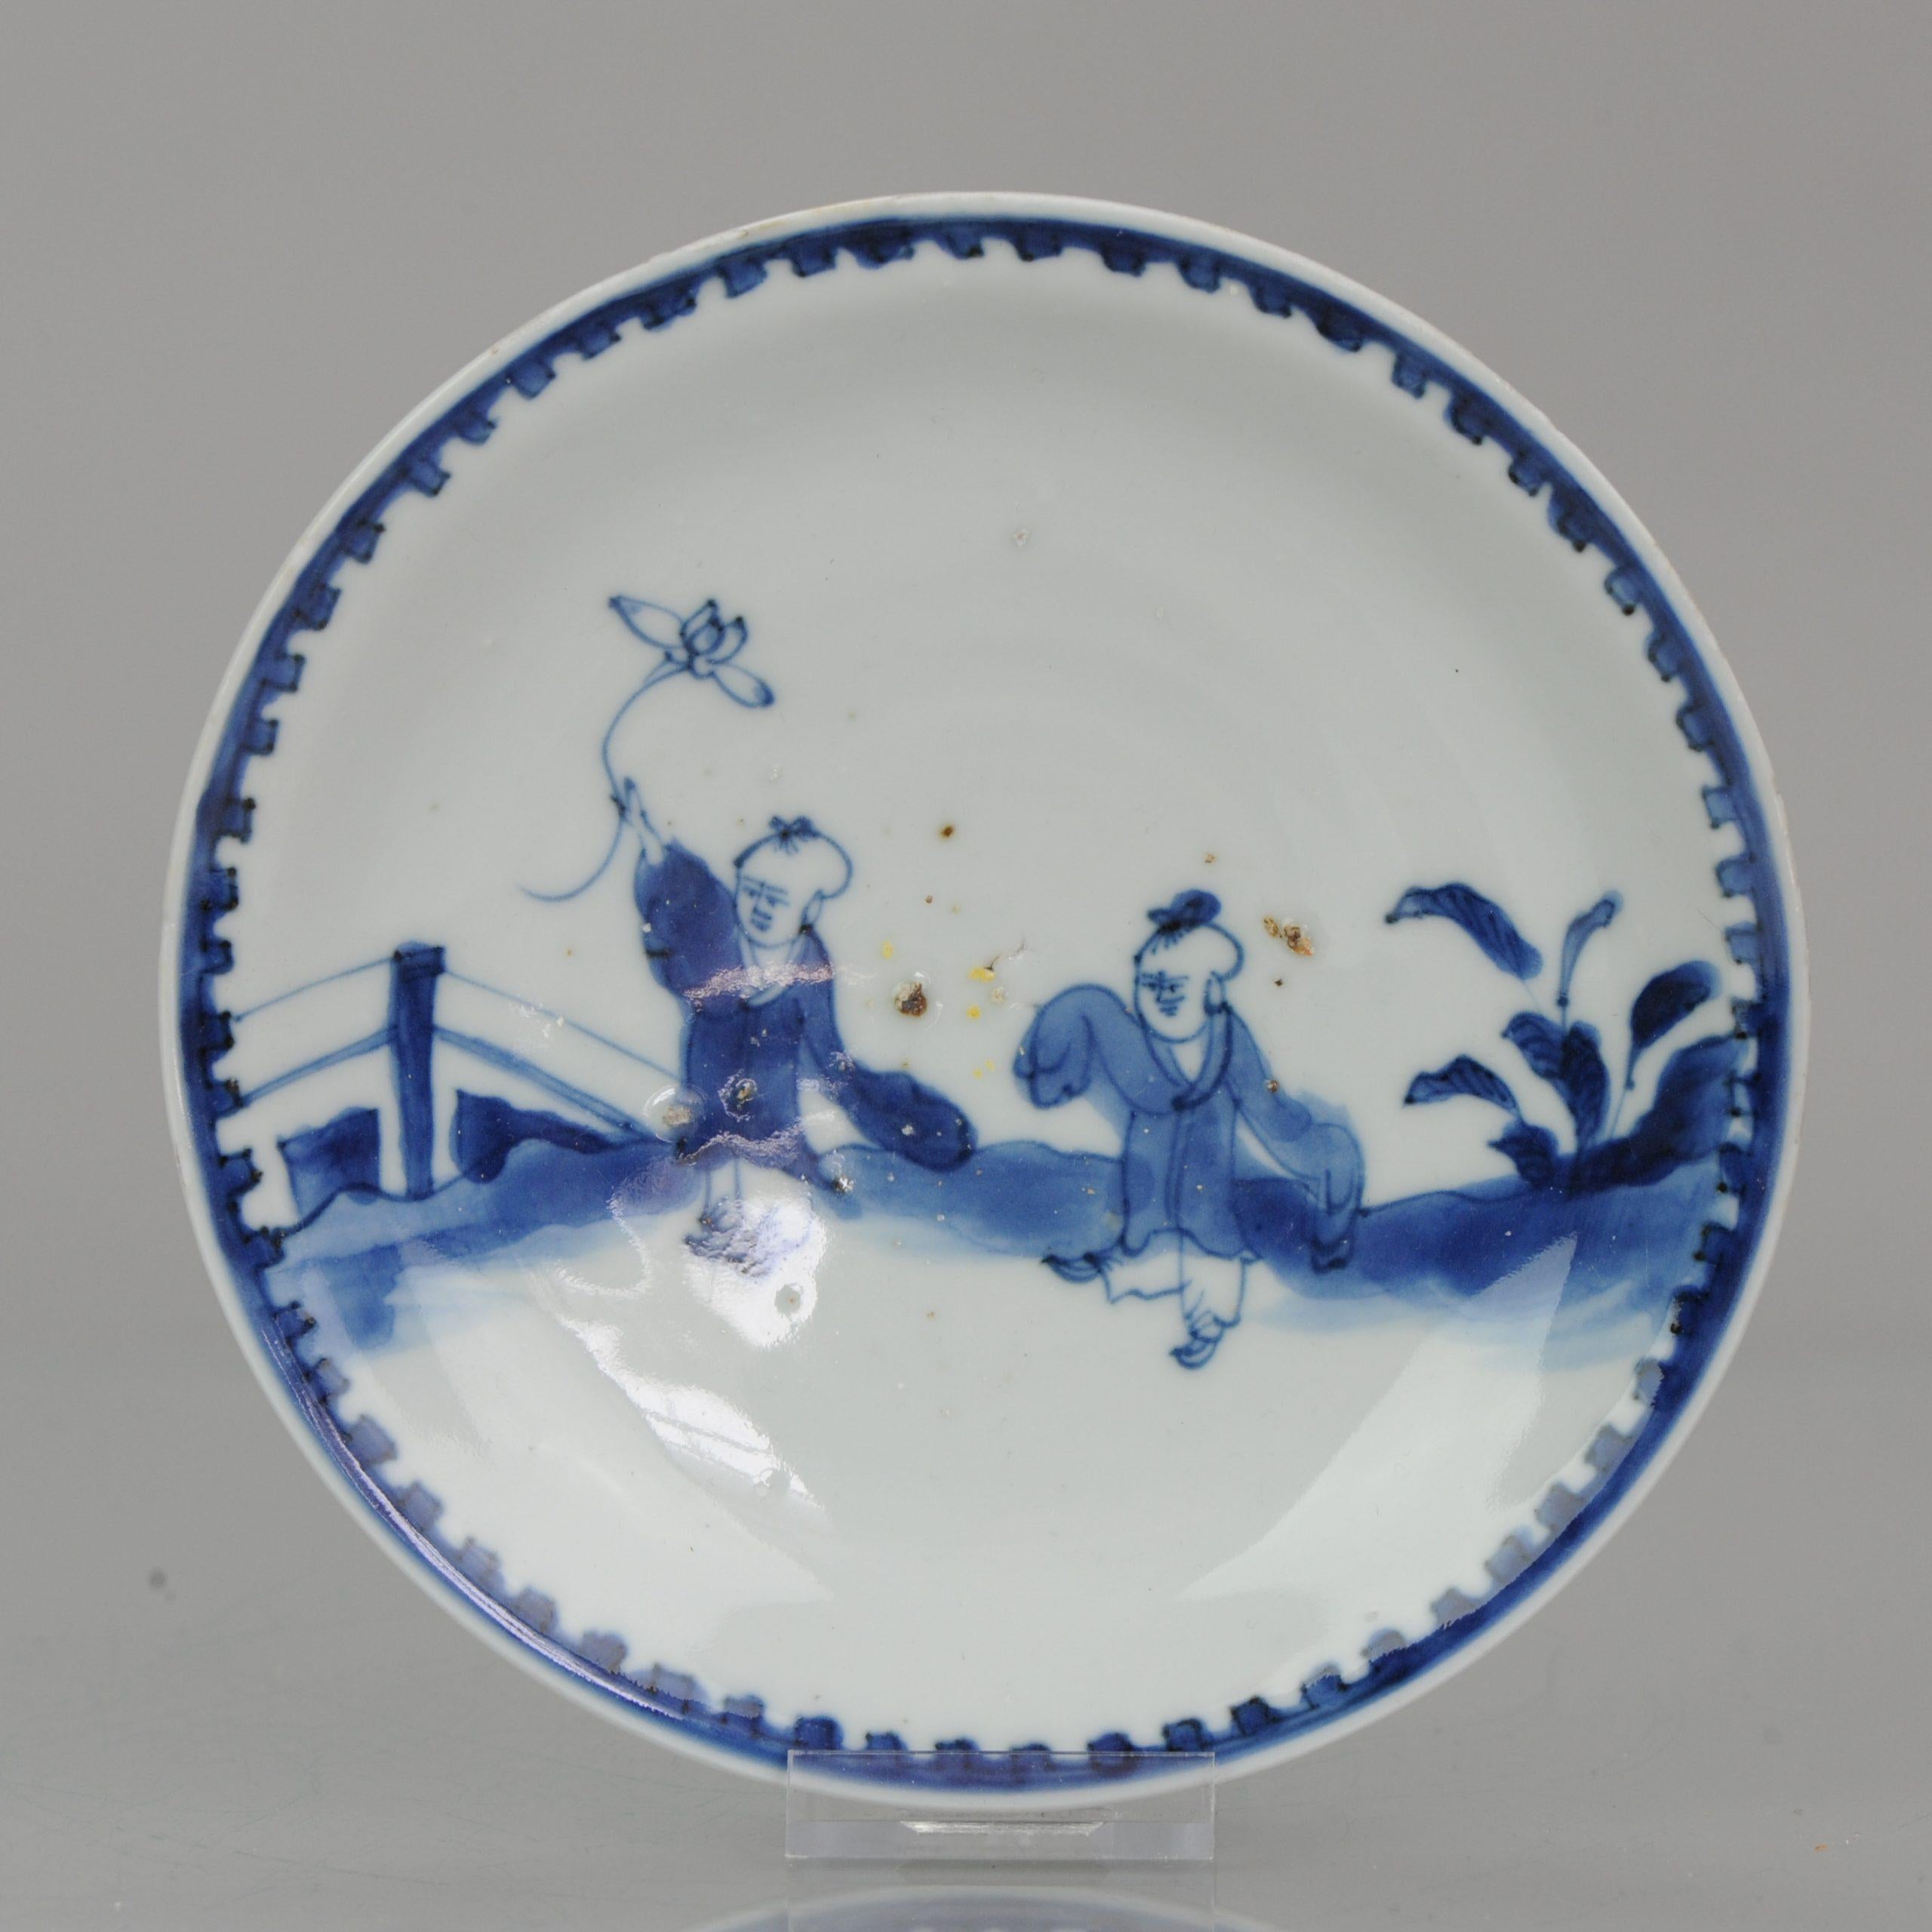 Description

A very nicely decorated Late Ming Blue and White Porcelain Dish, Tianqi or Chongzhen Period c.1620-1635.

Made in China for the Japanese market. The subject is of two young Chinese boys walking in a garden, one is holding a